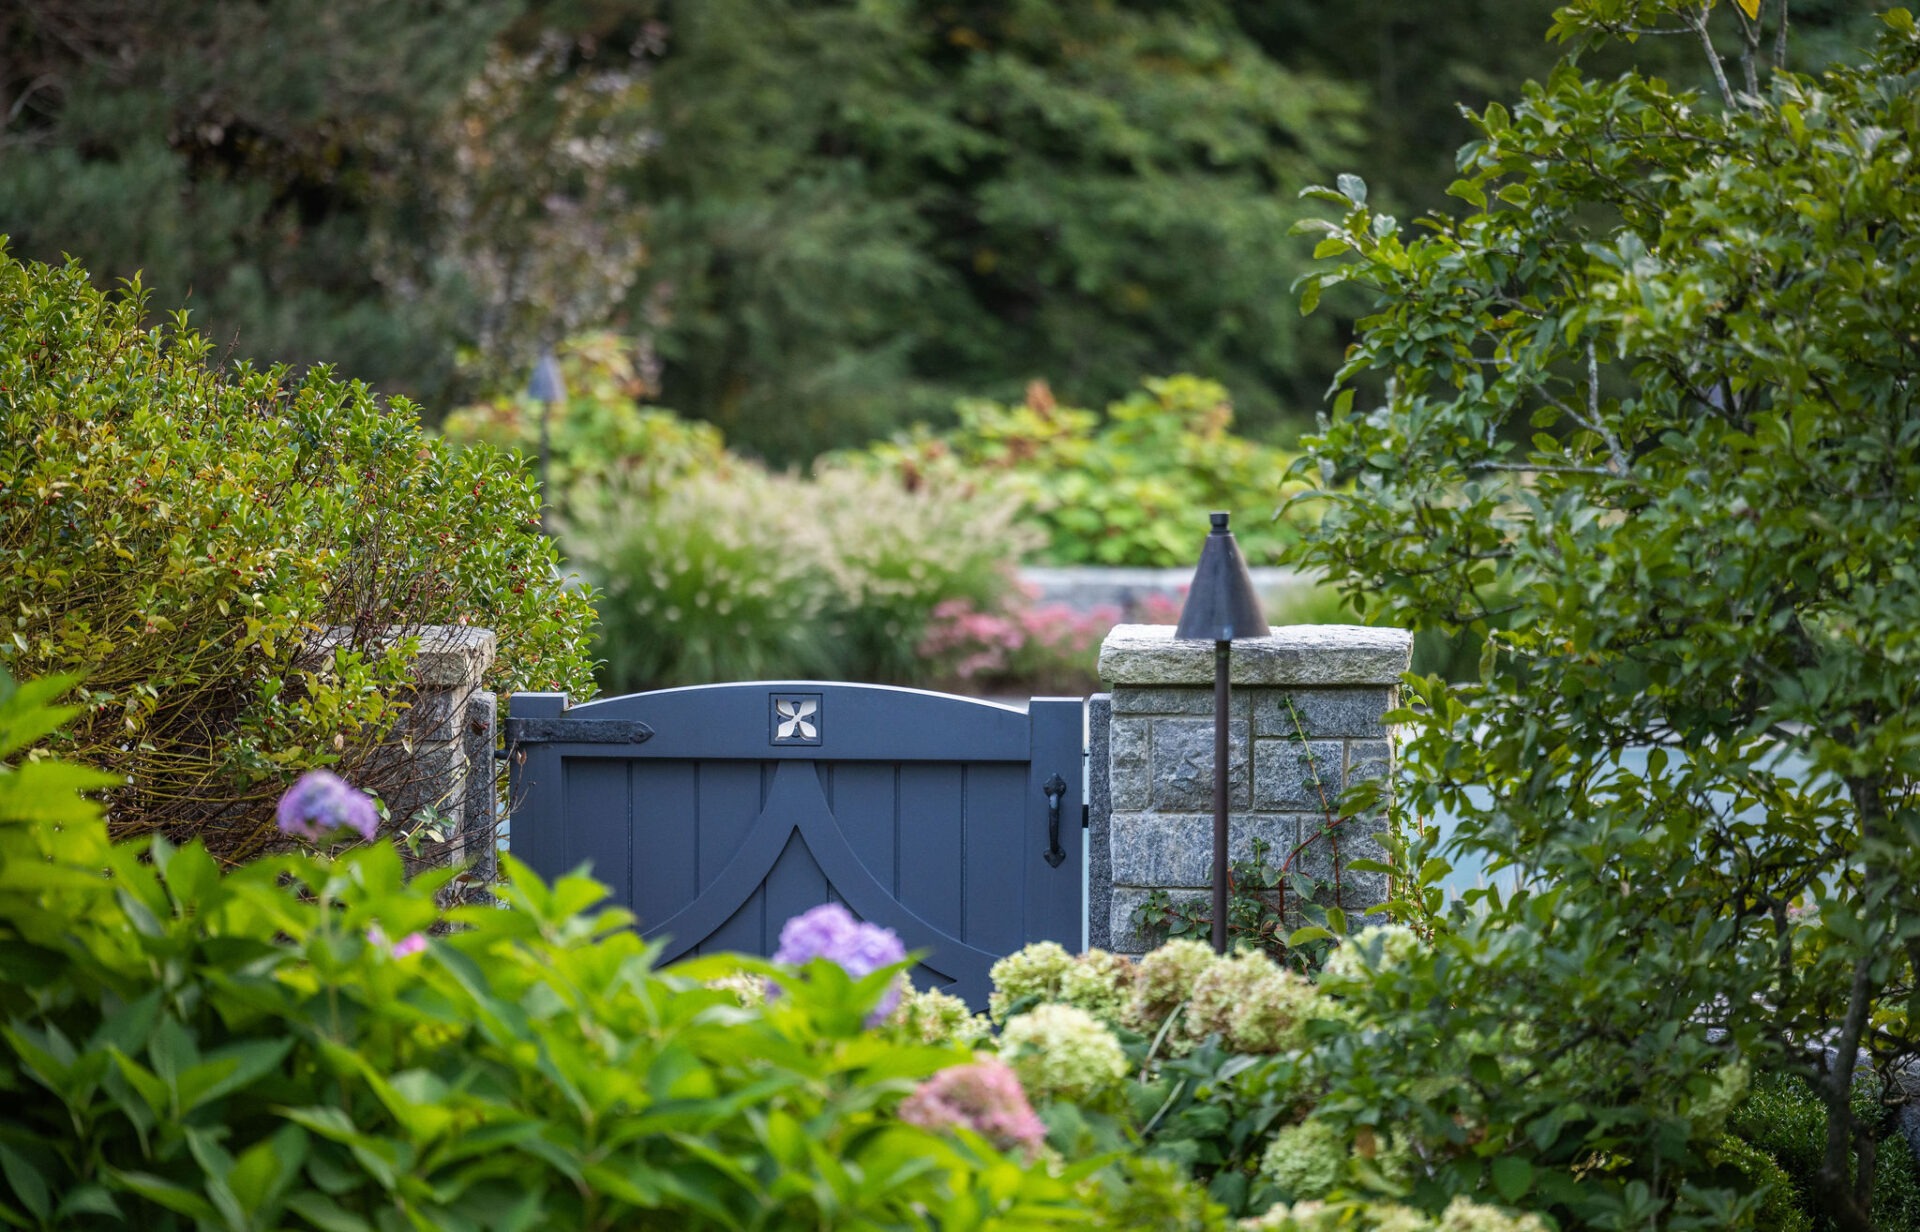 A blue gate with decorative hardware set in a stone wall, partially hidden by lush greenery and blooming flowers in a tranquil garden setting.